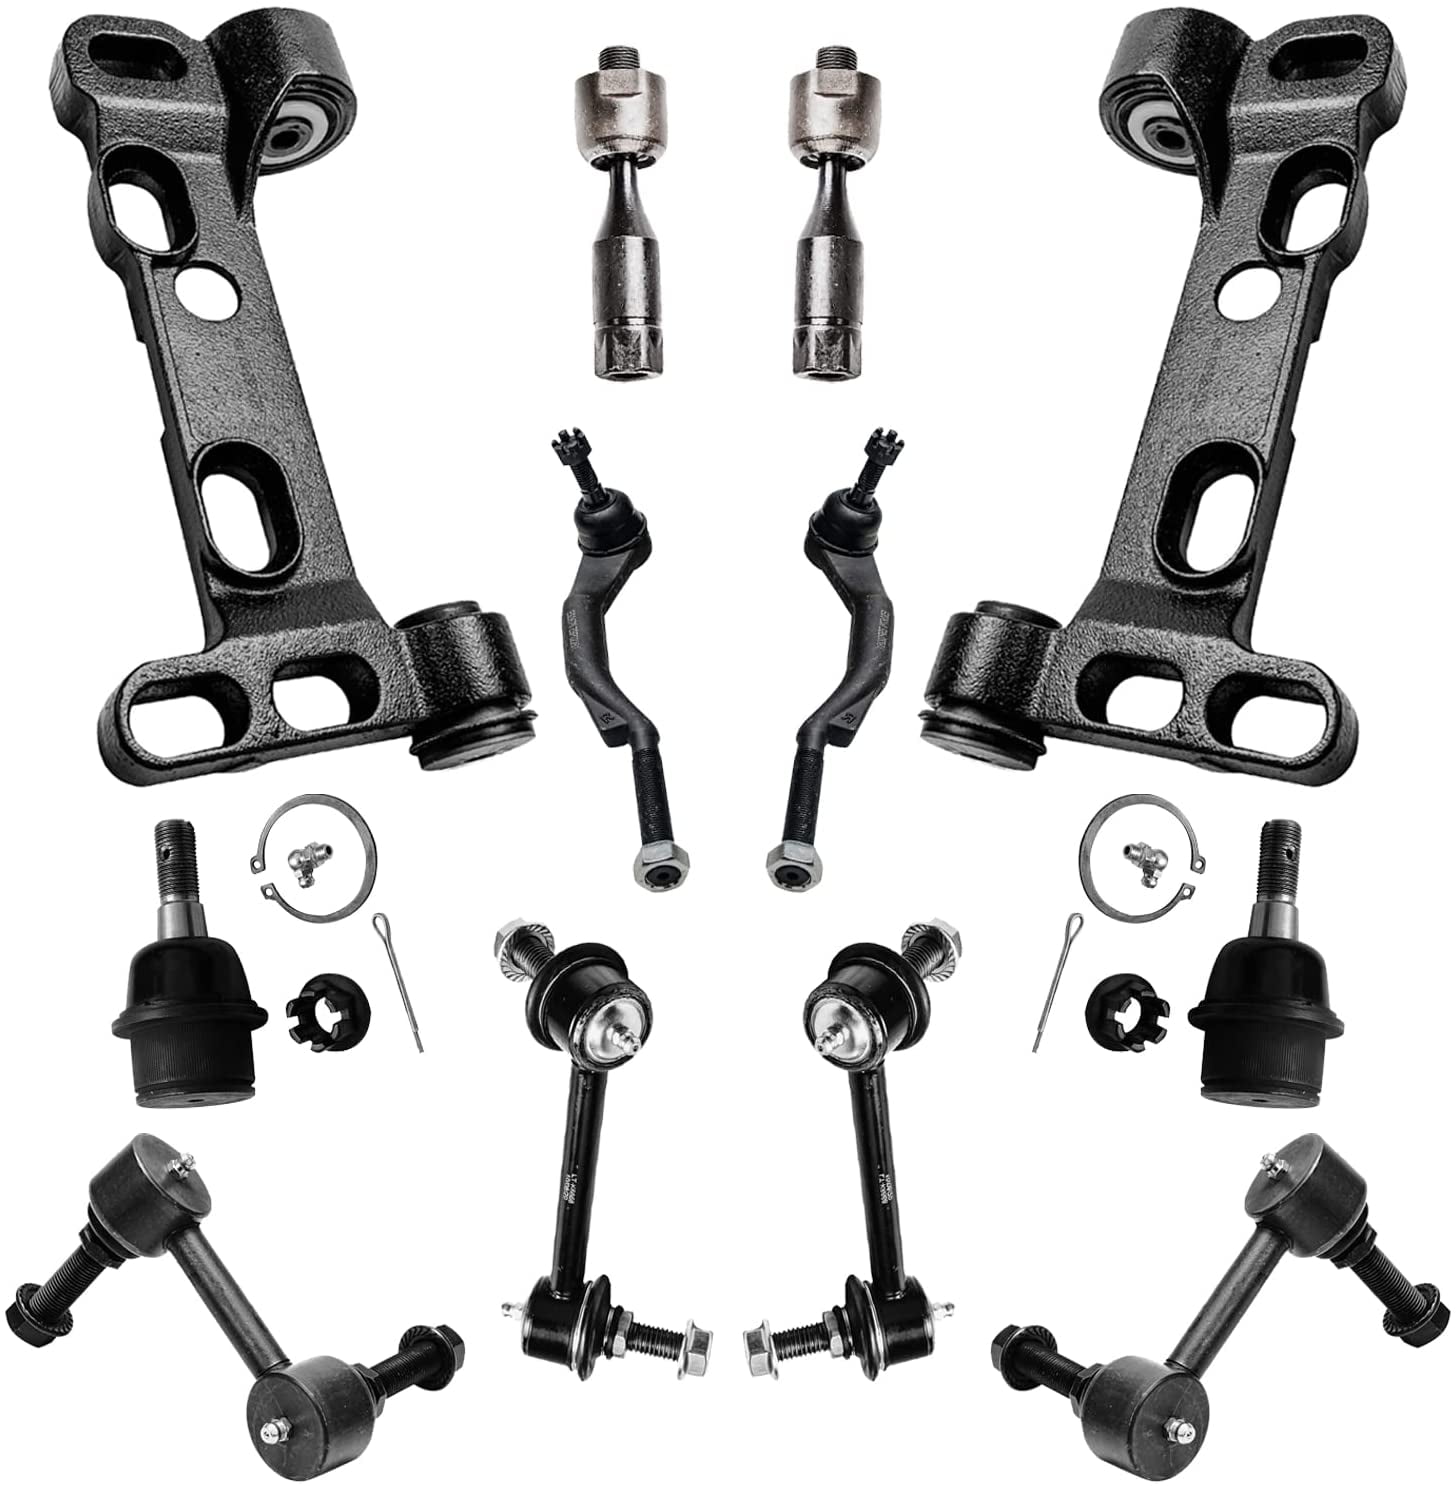 6PC Front Rear Stabilizer Bars Outer Tie Rods Kit For Trailblazer Envoy 9-7x